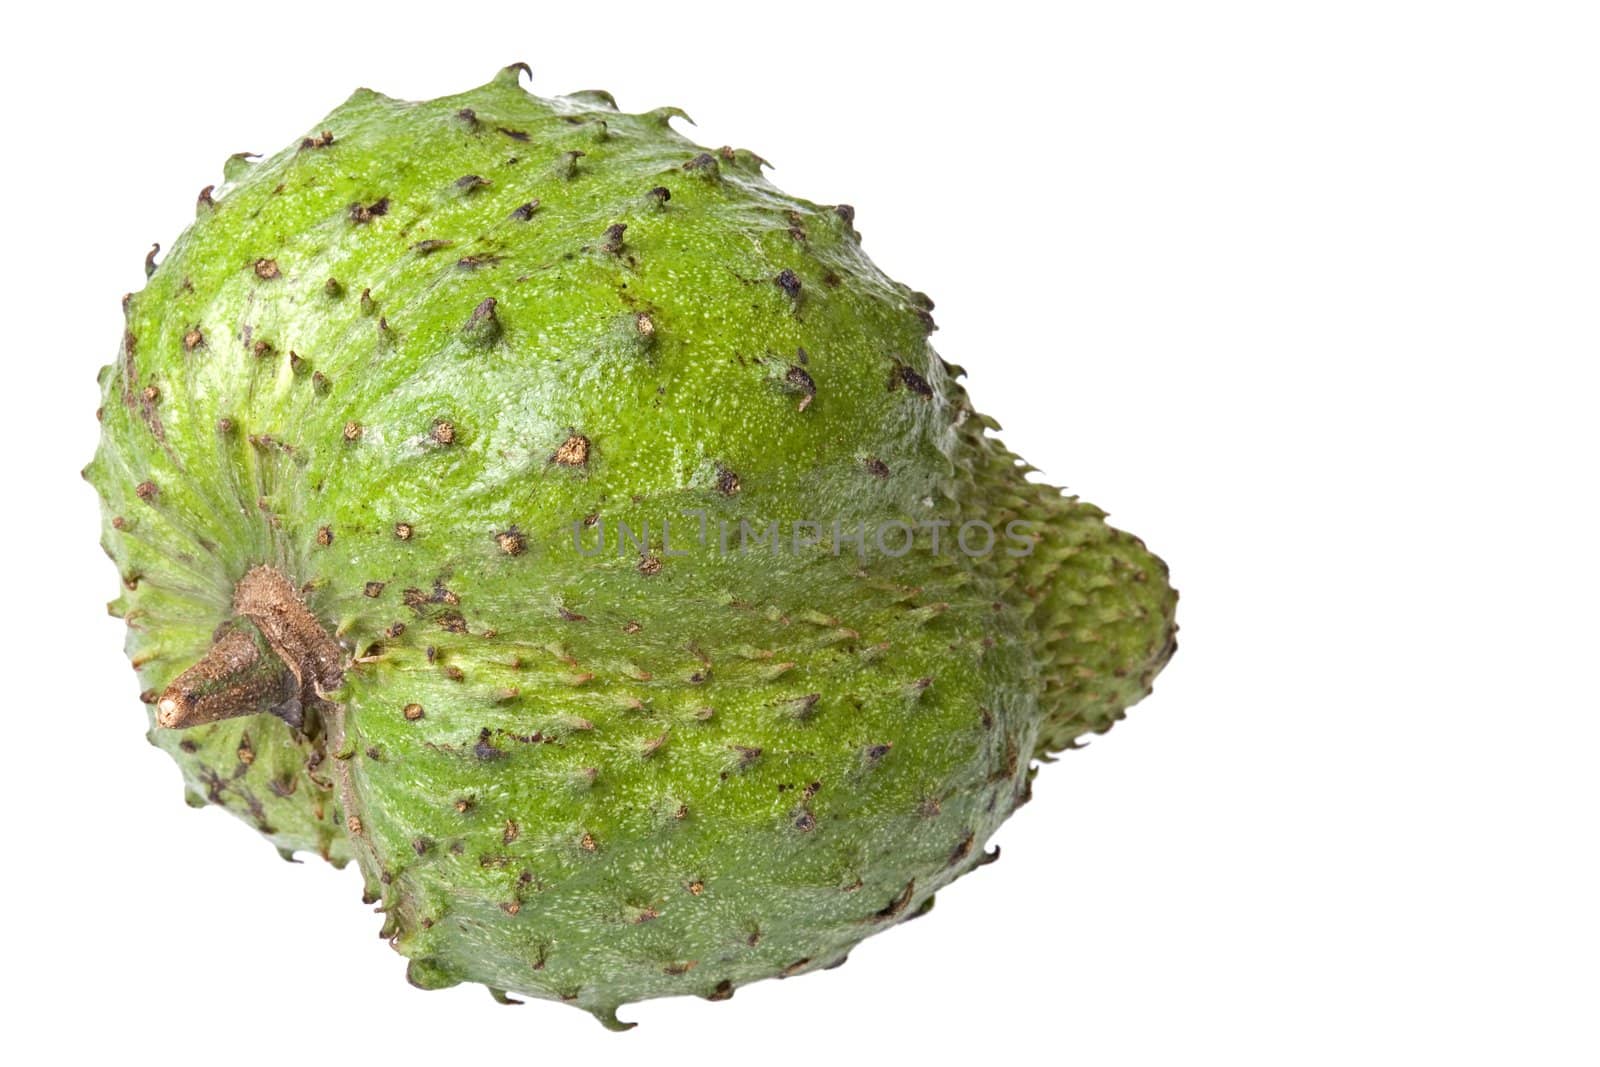 Isolated close-up image of a soursop.